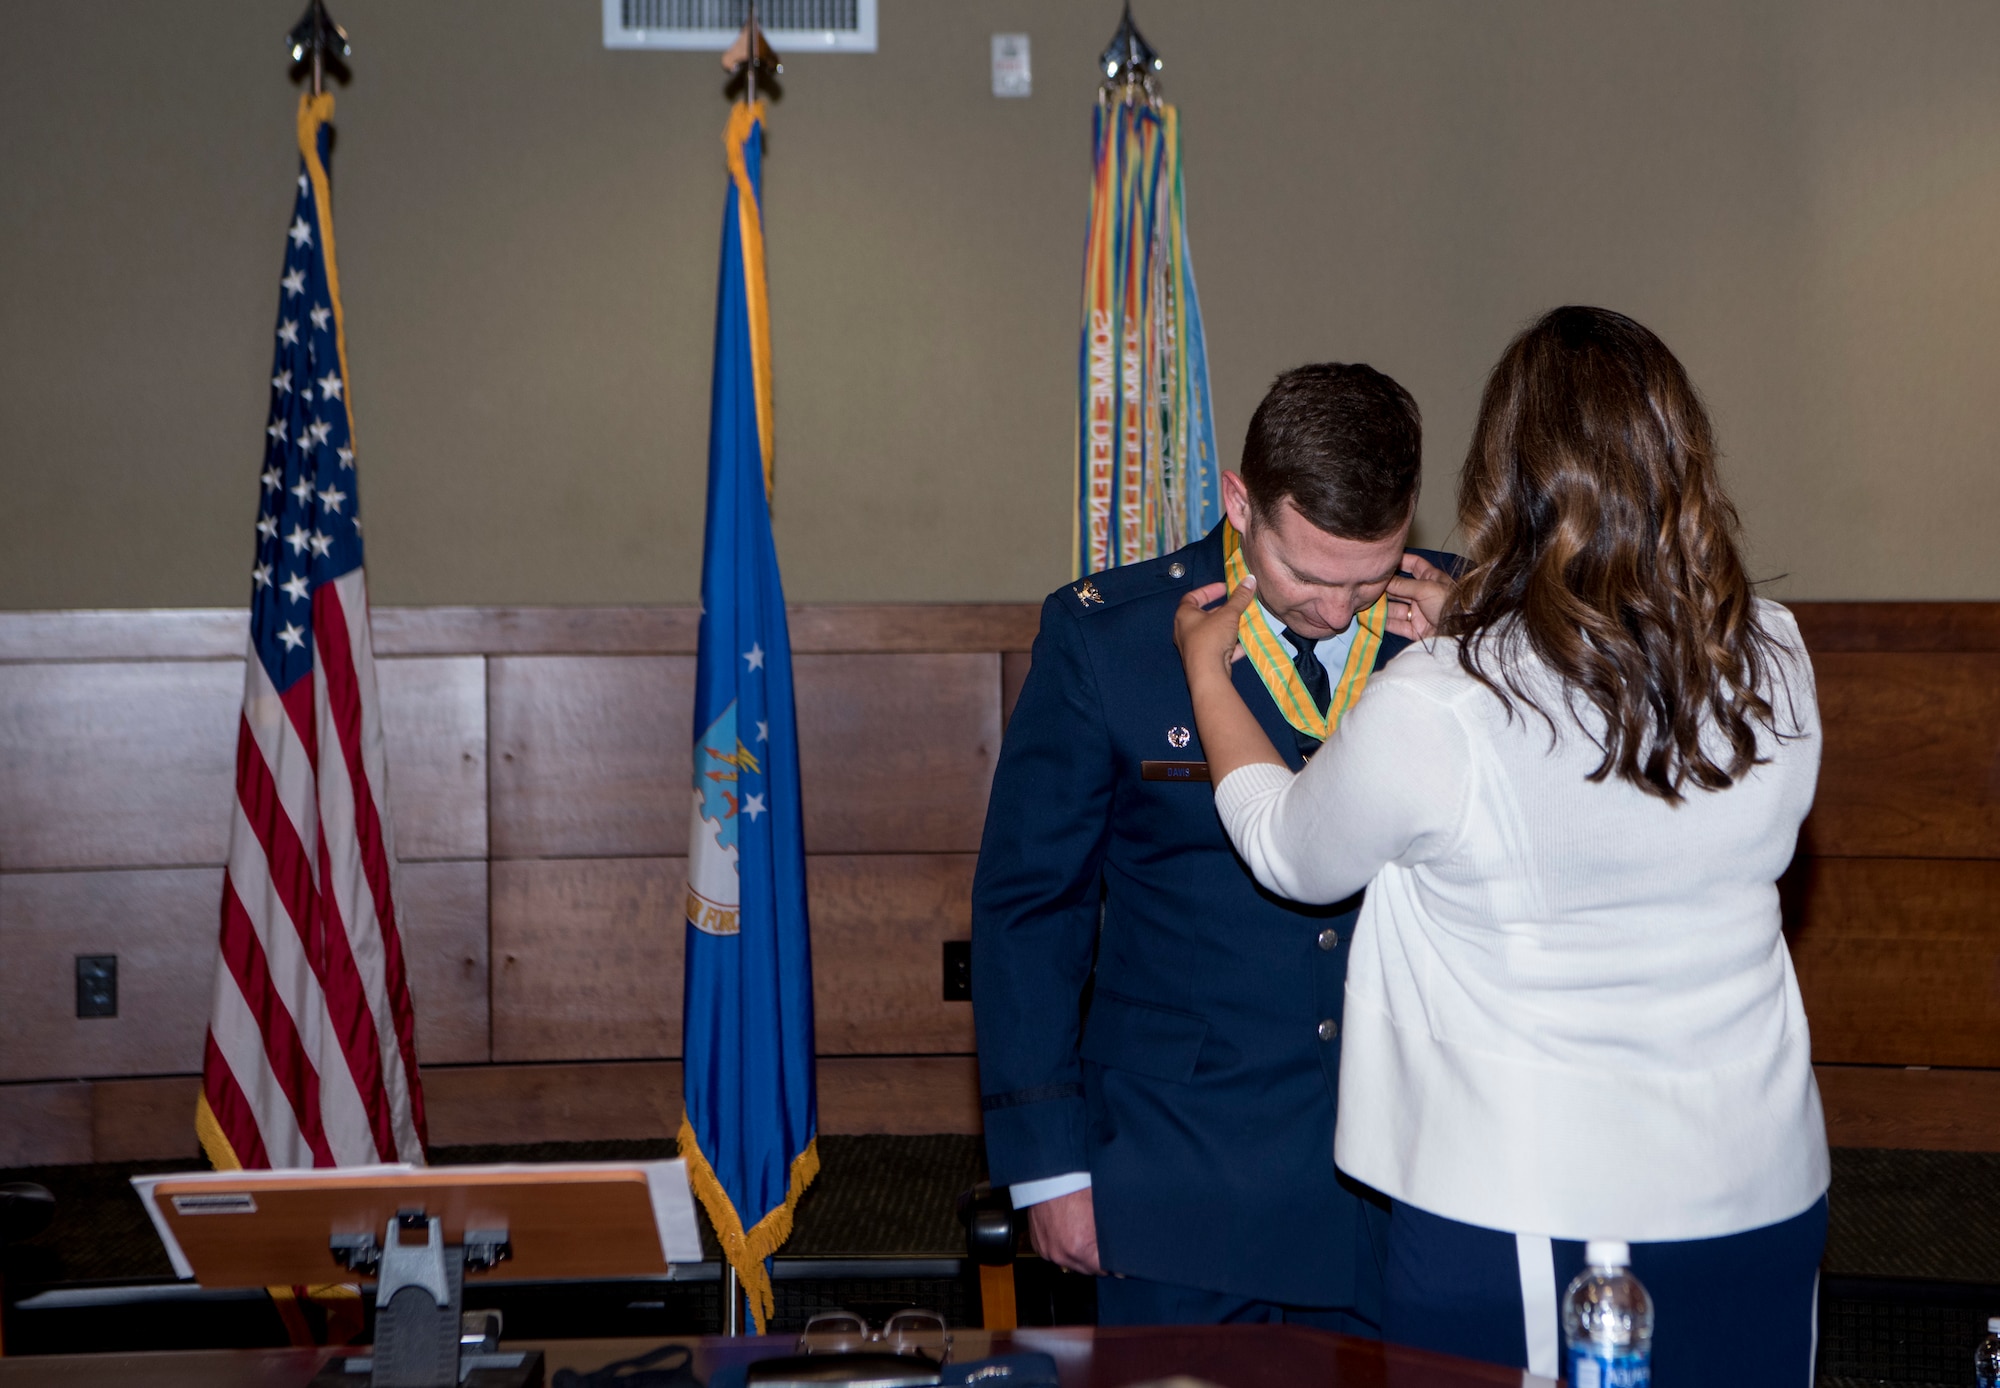 Kathy Davis, spouse of outgoing 3rd Wing commander, U.S. Air Force Col. Robert Davis, gives the Alaska Legion of Merit medal to her husband as he relinquishes command of the wing to U.S. Air Force Col. Travolis Simmons during the 3rd WG change of command ceremony at Joint Base Elmendorf-Richardson, Alaska, July 17, 2020. The 3rd WG provides trained and equipped tactical air dominance forces, command and control platforms, and strategic and tactical airlift resources for contingency operations and also provides immediate early airborne detection, warning, surveillance and interception of hostile forces within the Alaskan North American Aerospace Defense Command Region. The ceremony was adapted to comply with COVID-19 health and safety measures.